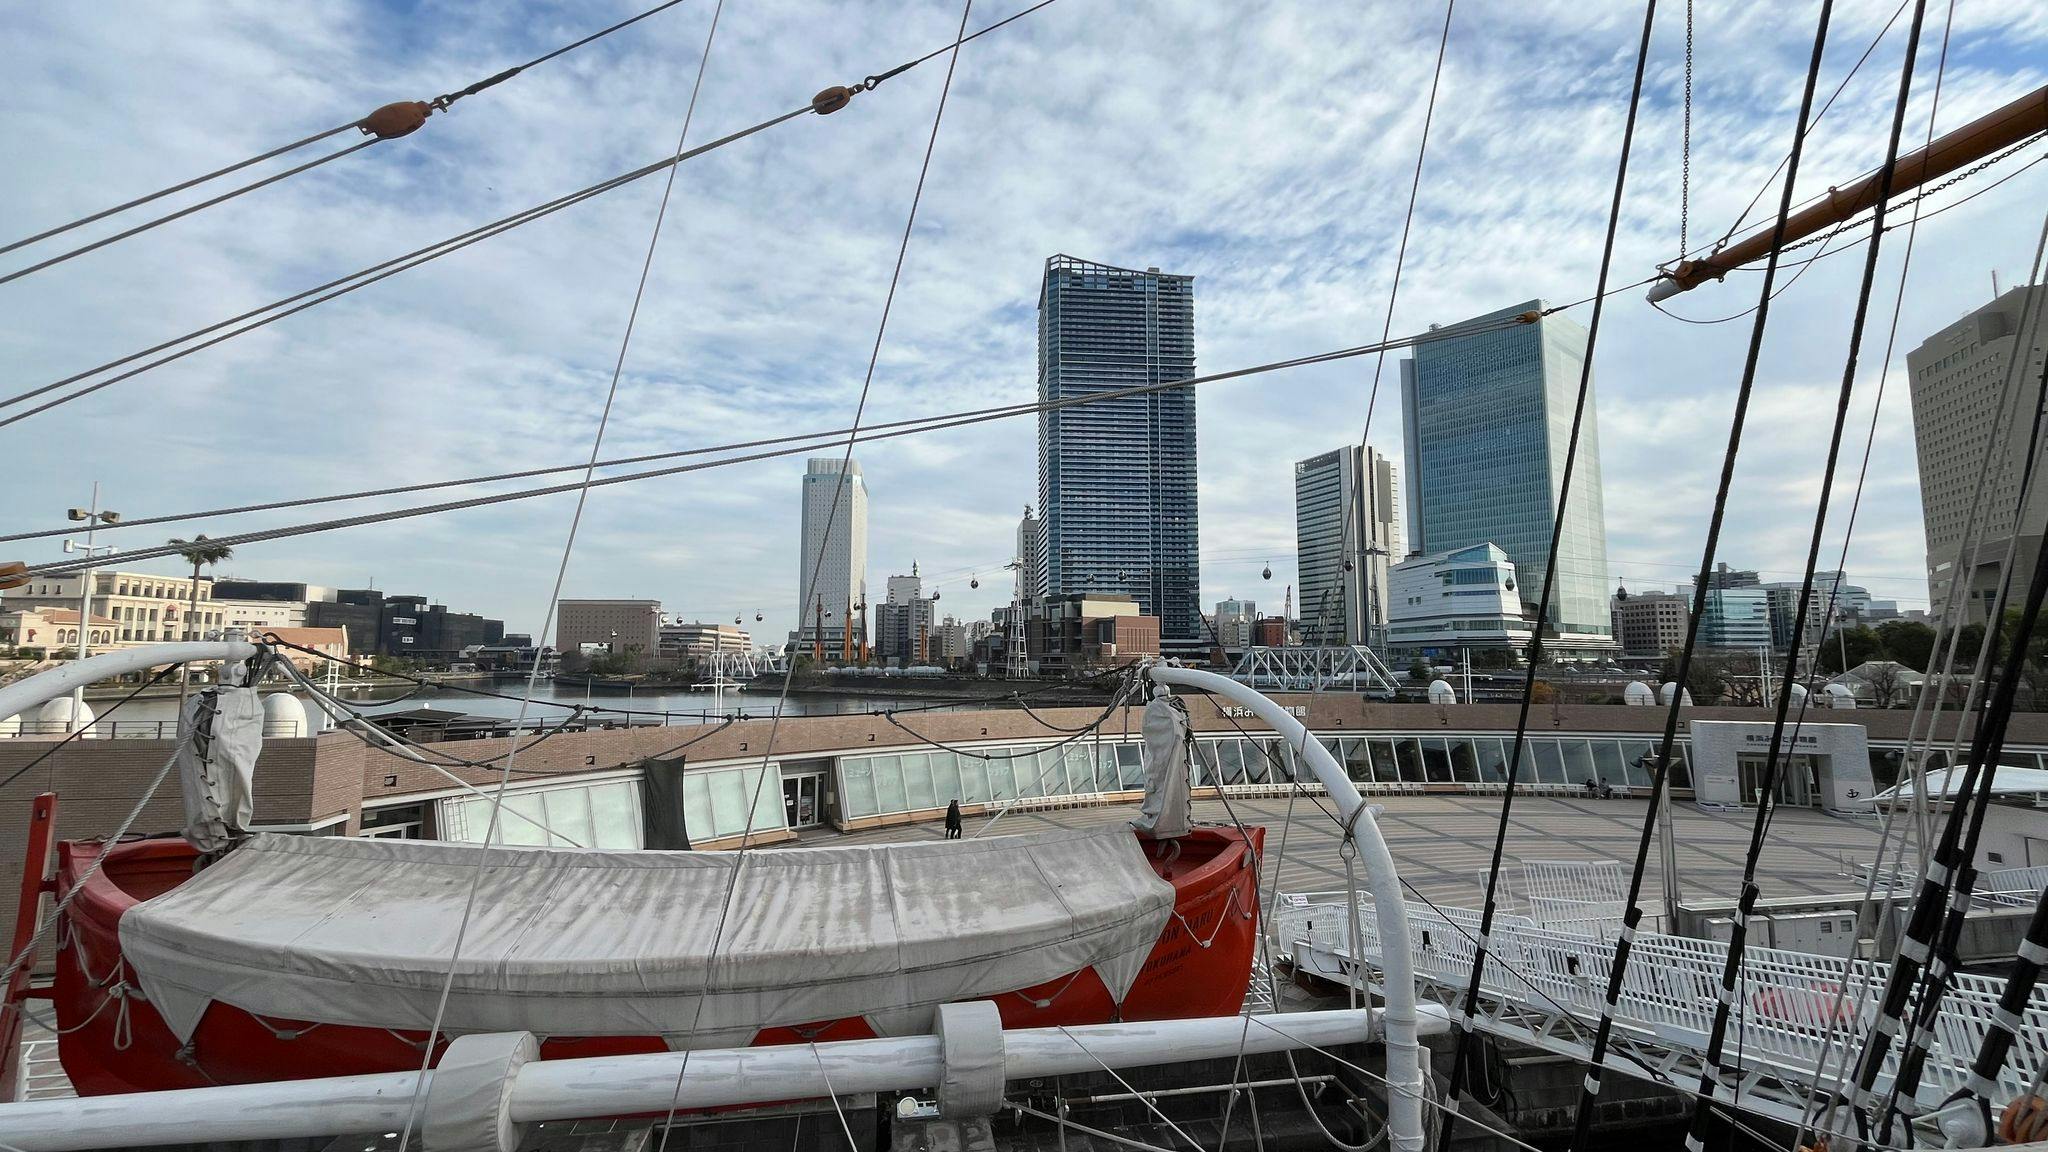 The View of the Yokohama Port Museum from the Ship Nippon Maru